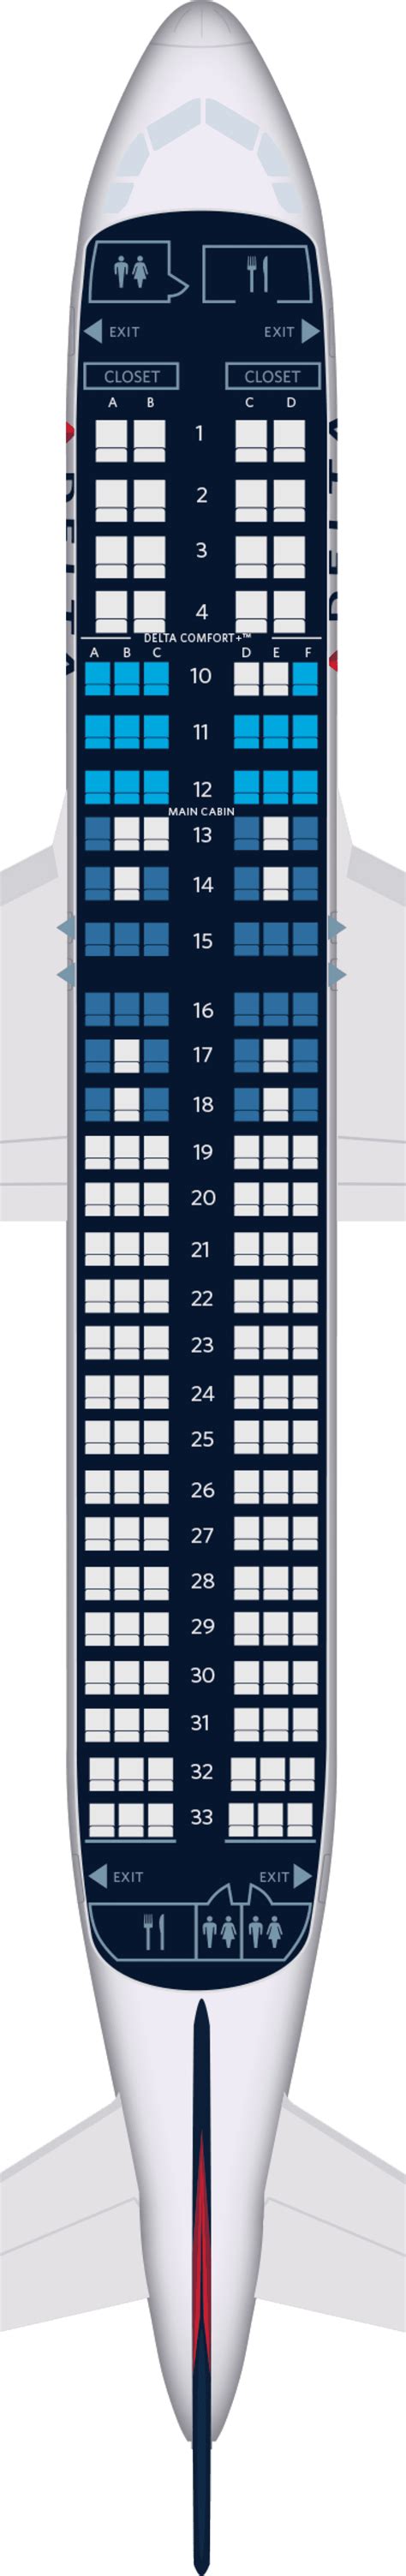 Lufthansa Airbus A320 Seating Chart Porn Sex Picture